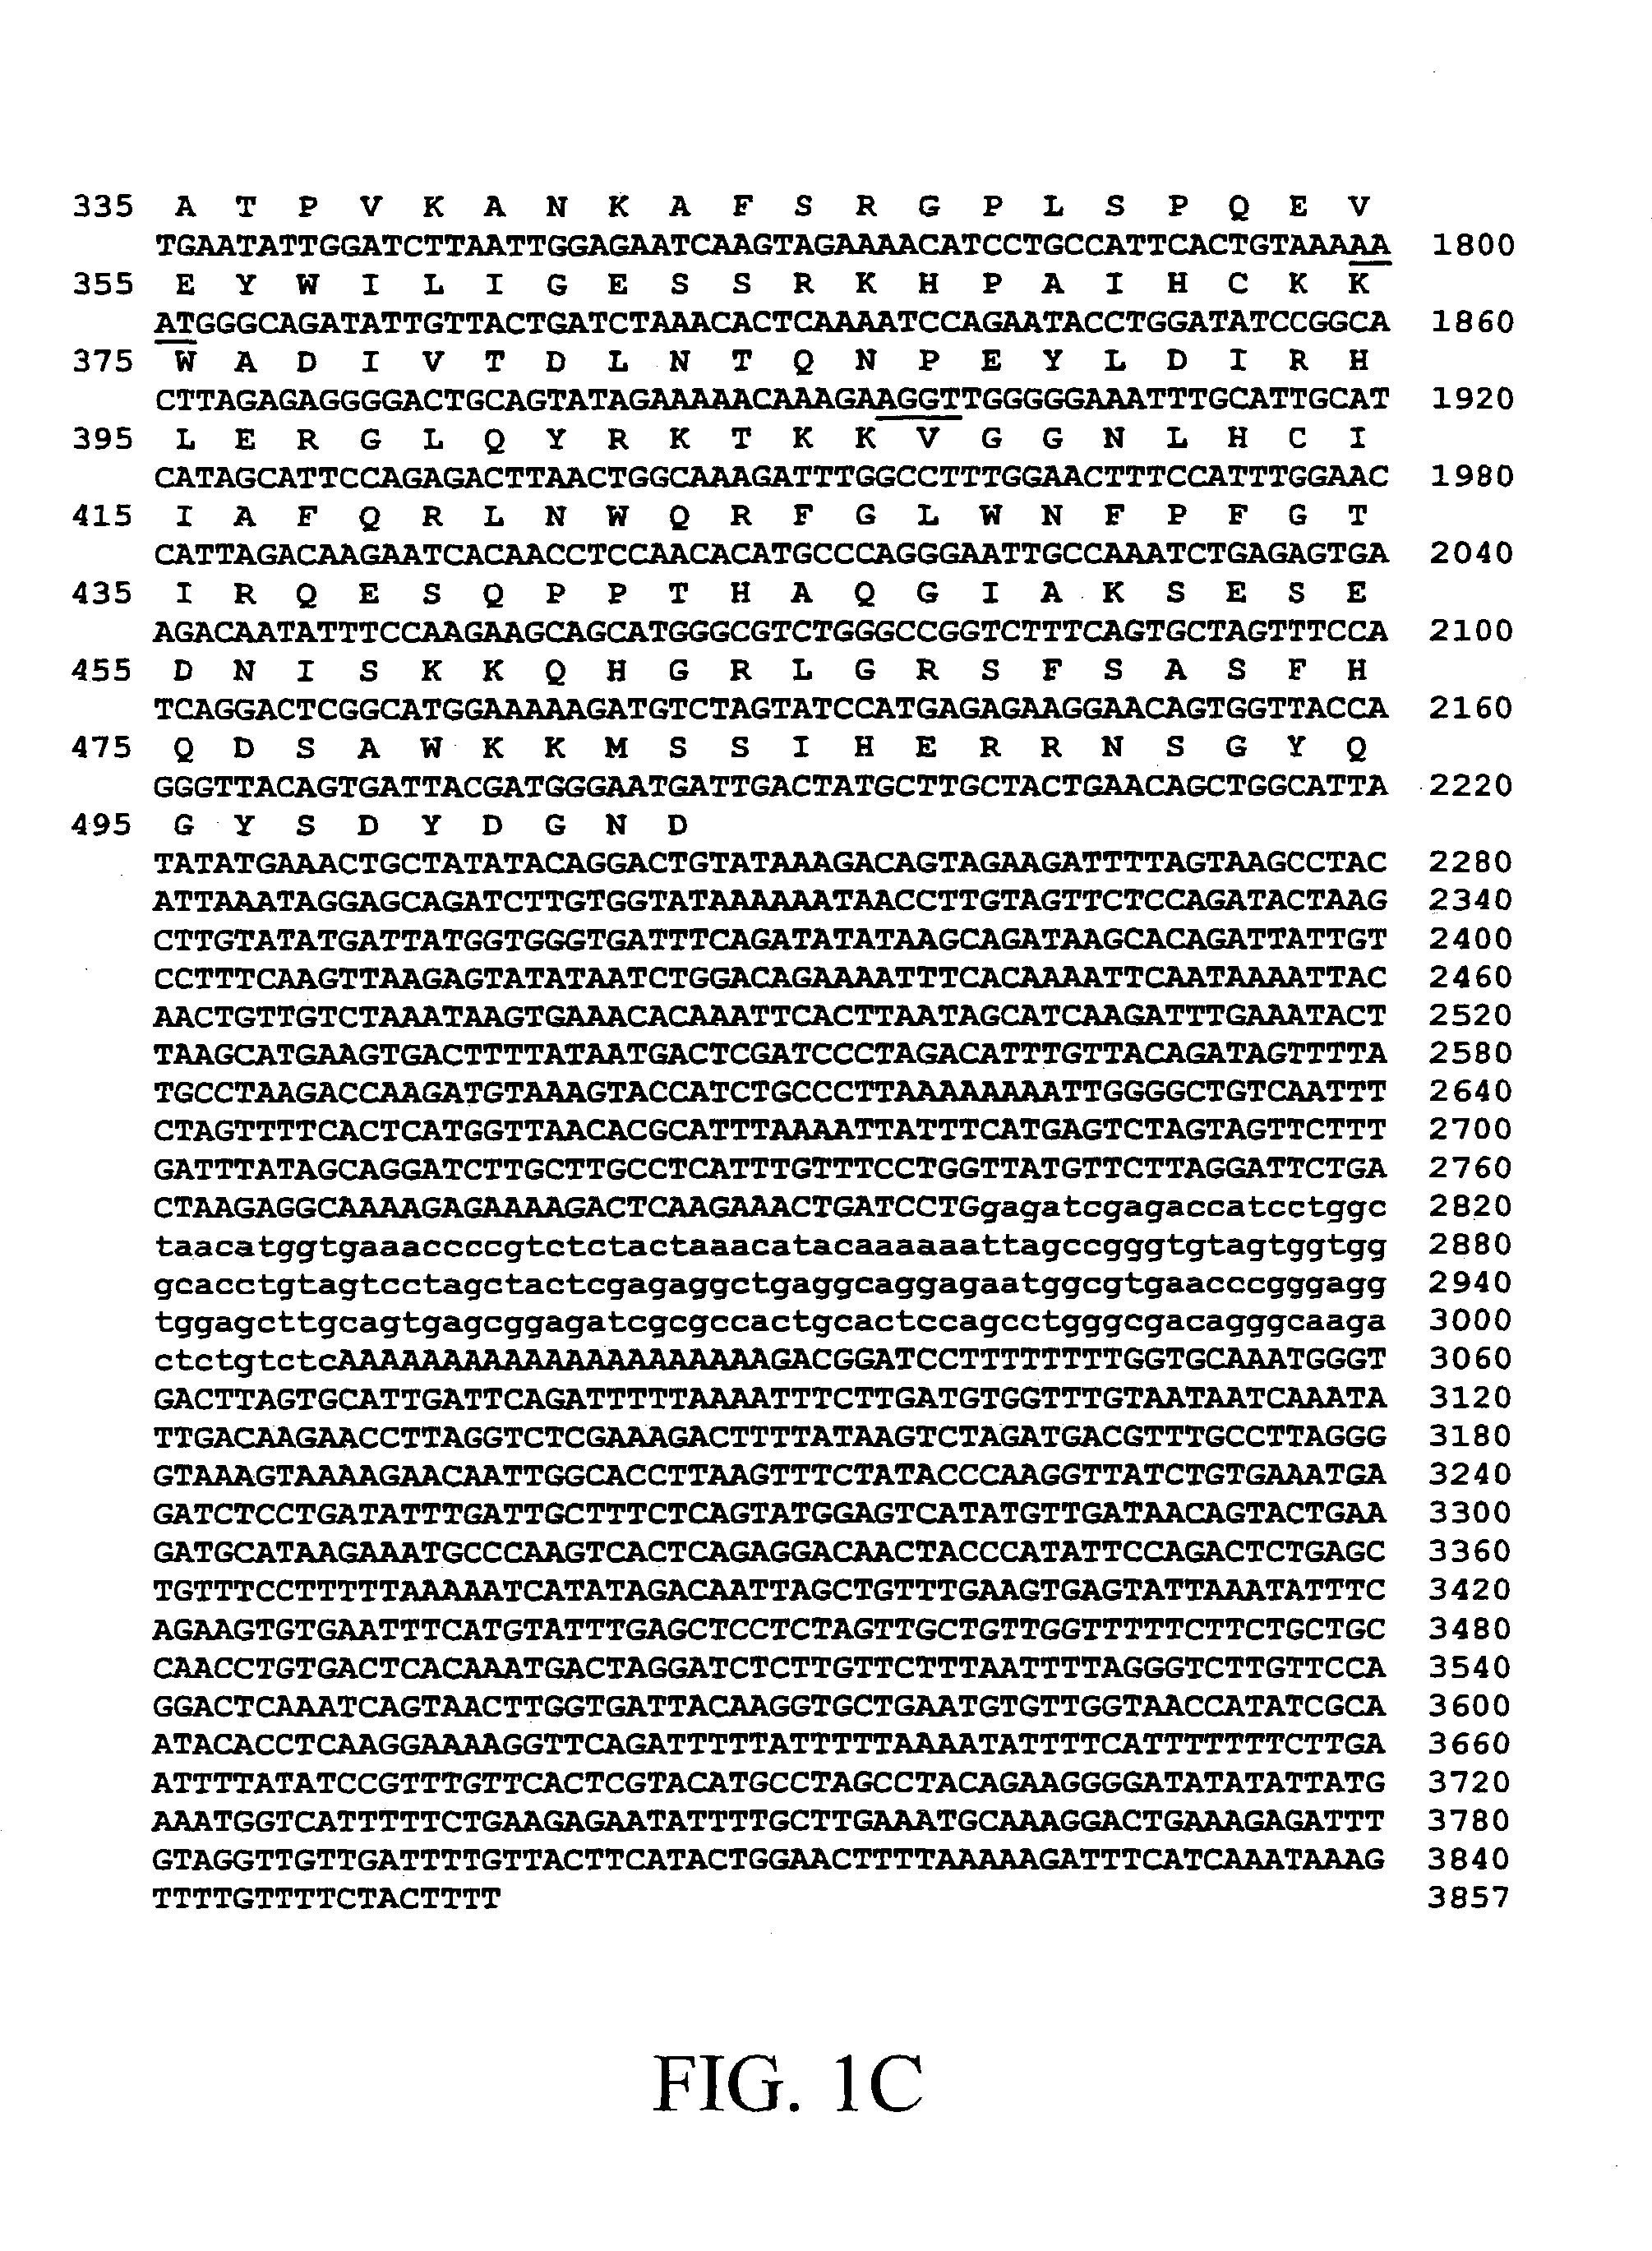 BIVM (basic, immunoglobulin-like variable motif-containing) gene, transcriptional products, and uses thereof